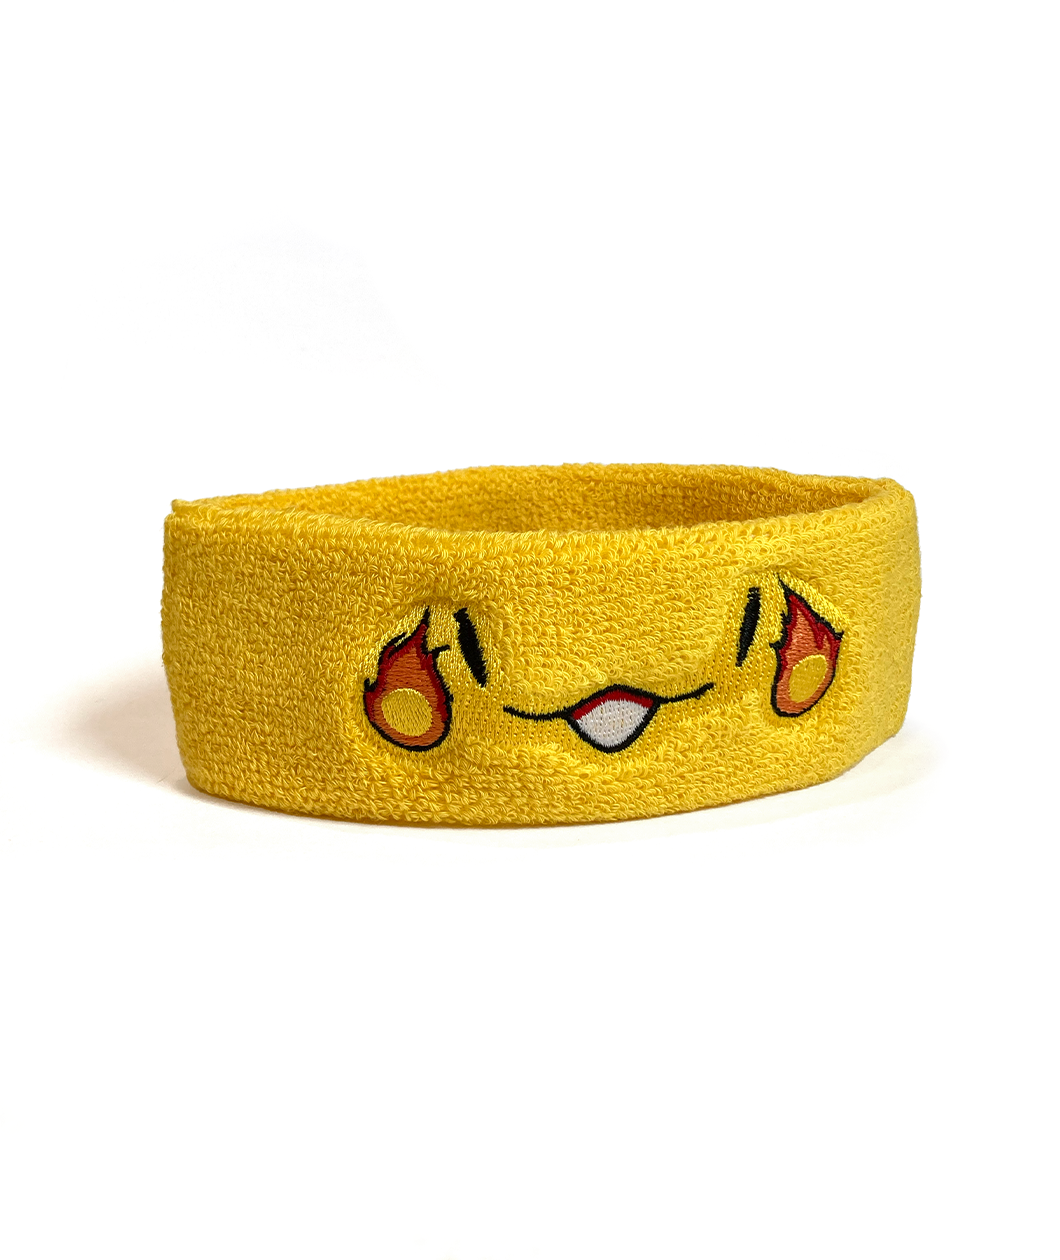 A yellow sweatband with a smiling face that has a fireball on the side of each eye.